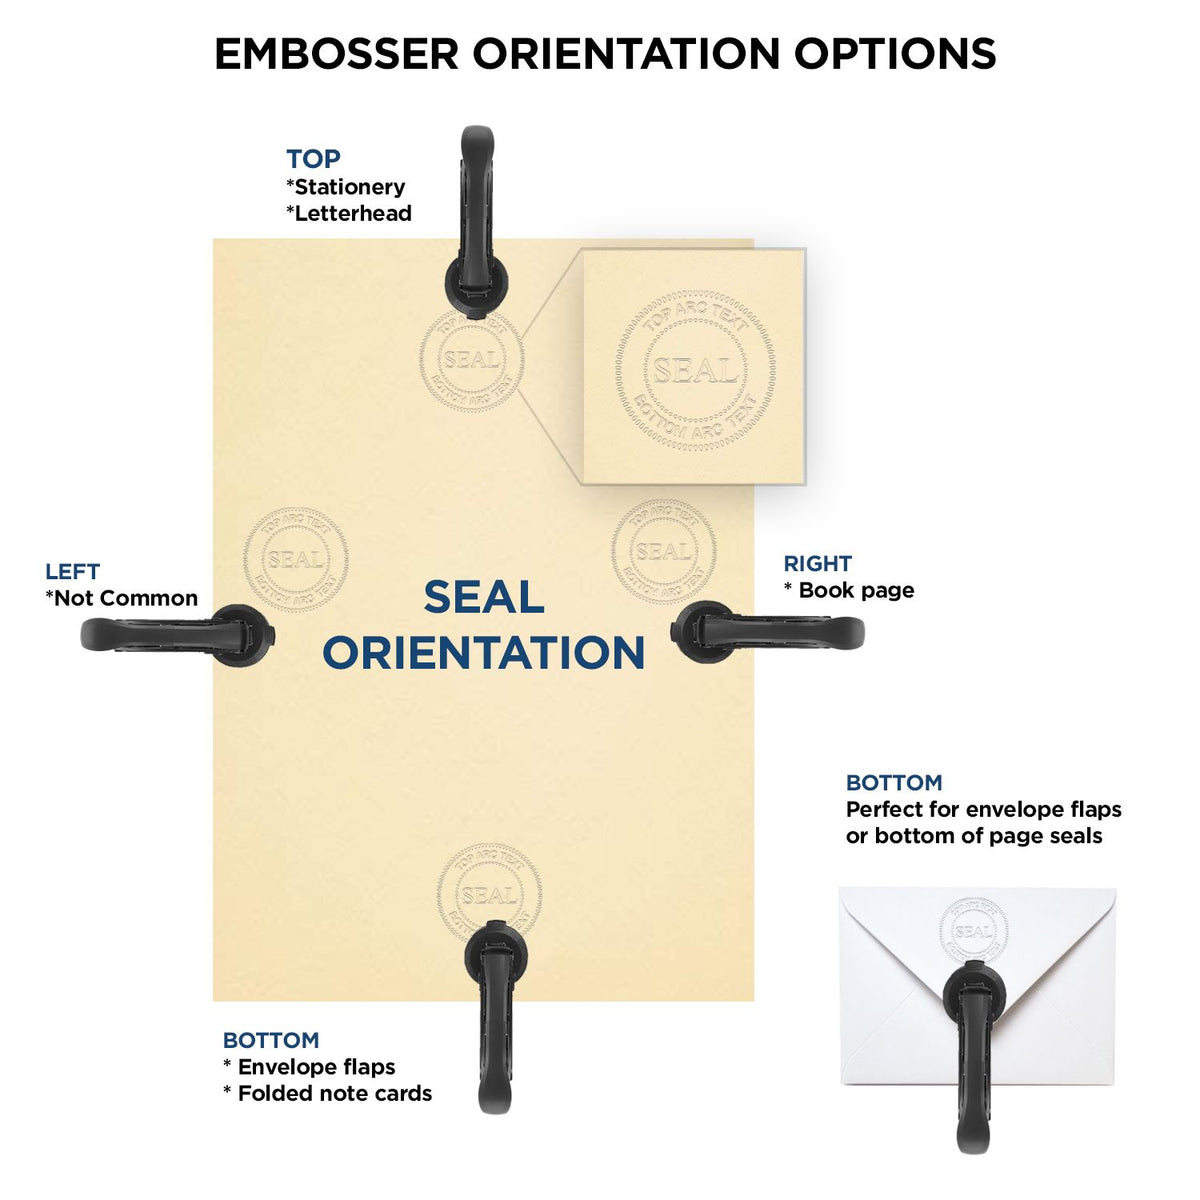 An infographic for the Gift Illinois Engineer Seal showing embosser orientation, this is showing examples of a top, bottom, right and left insert.